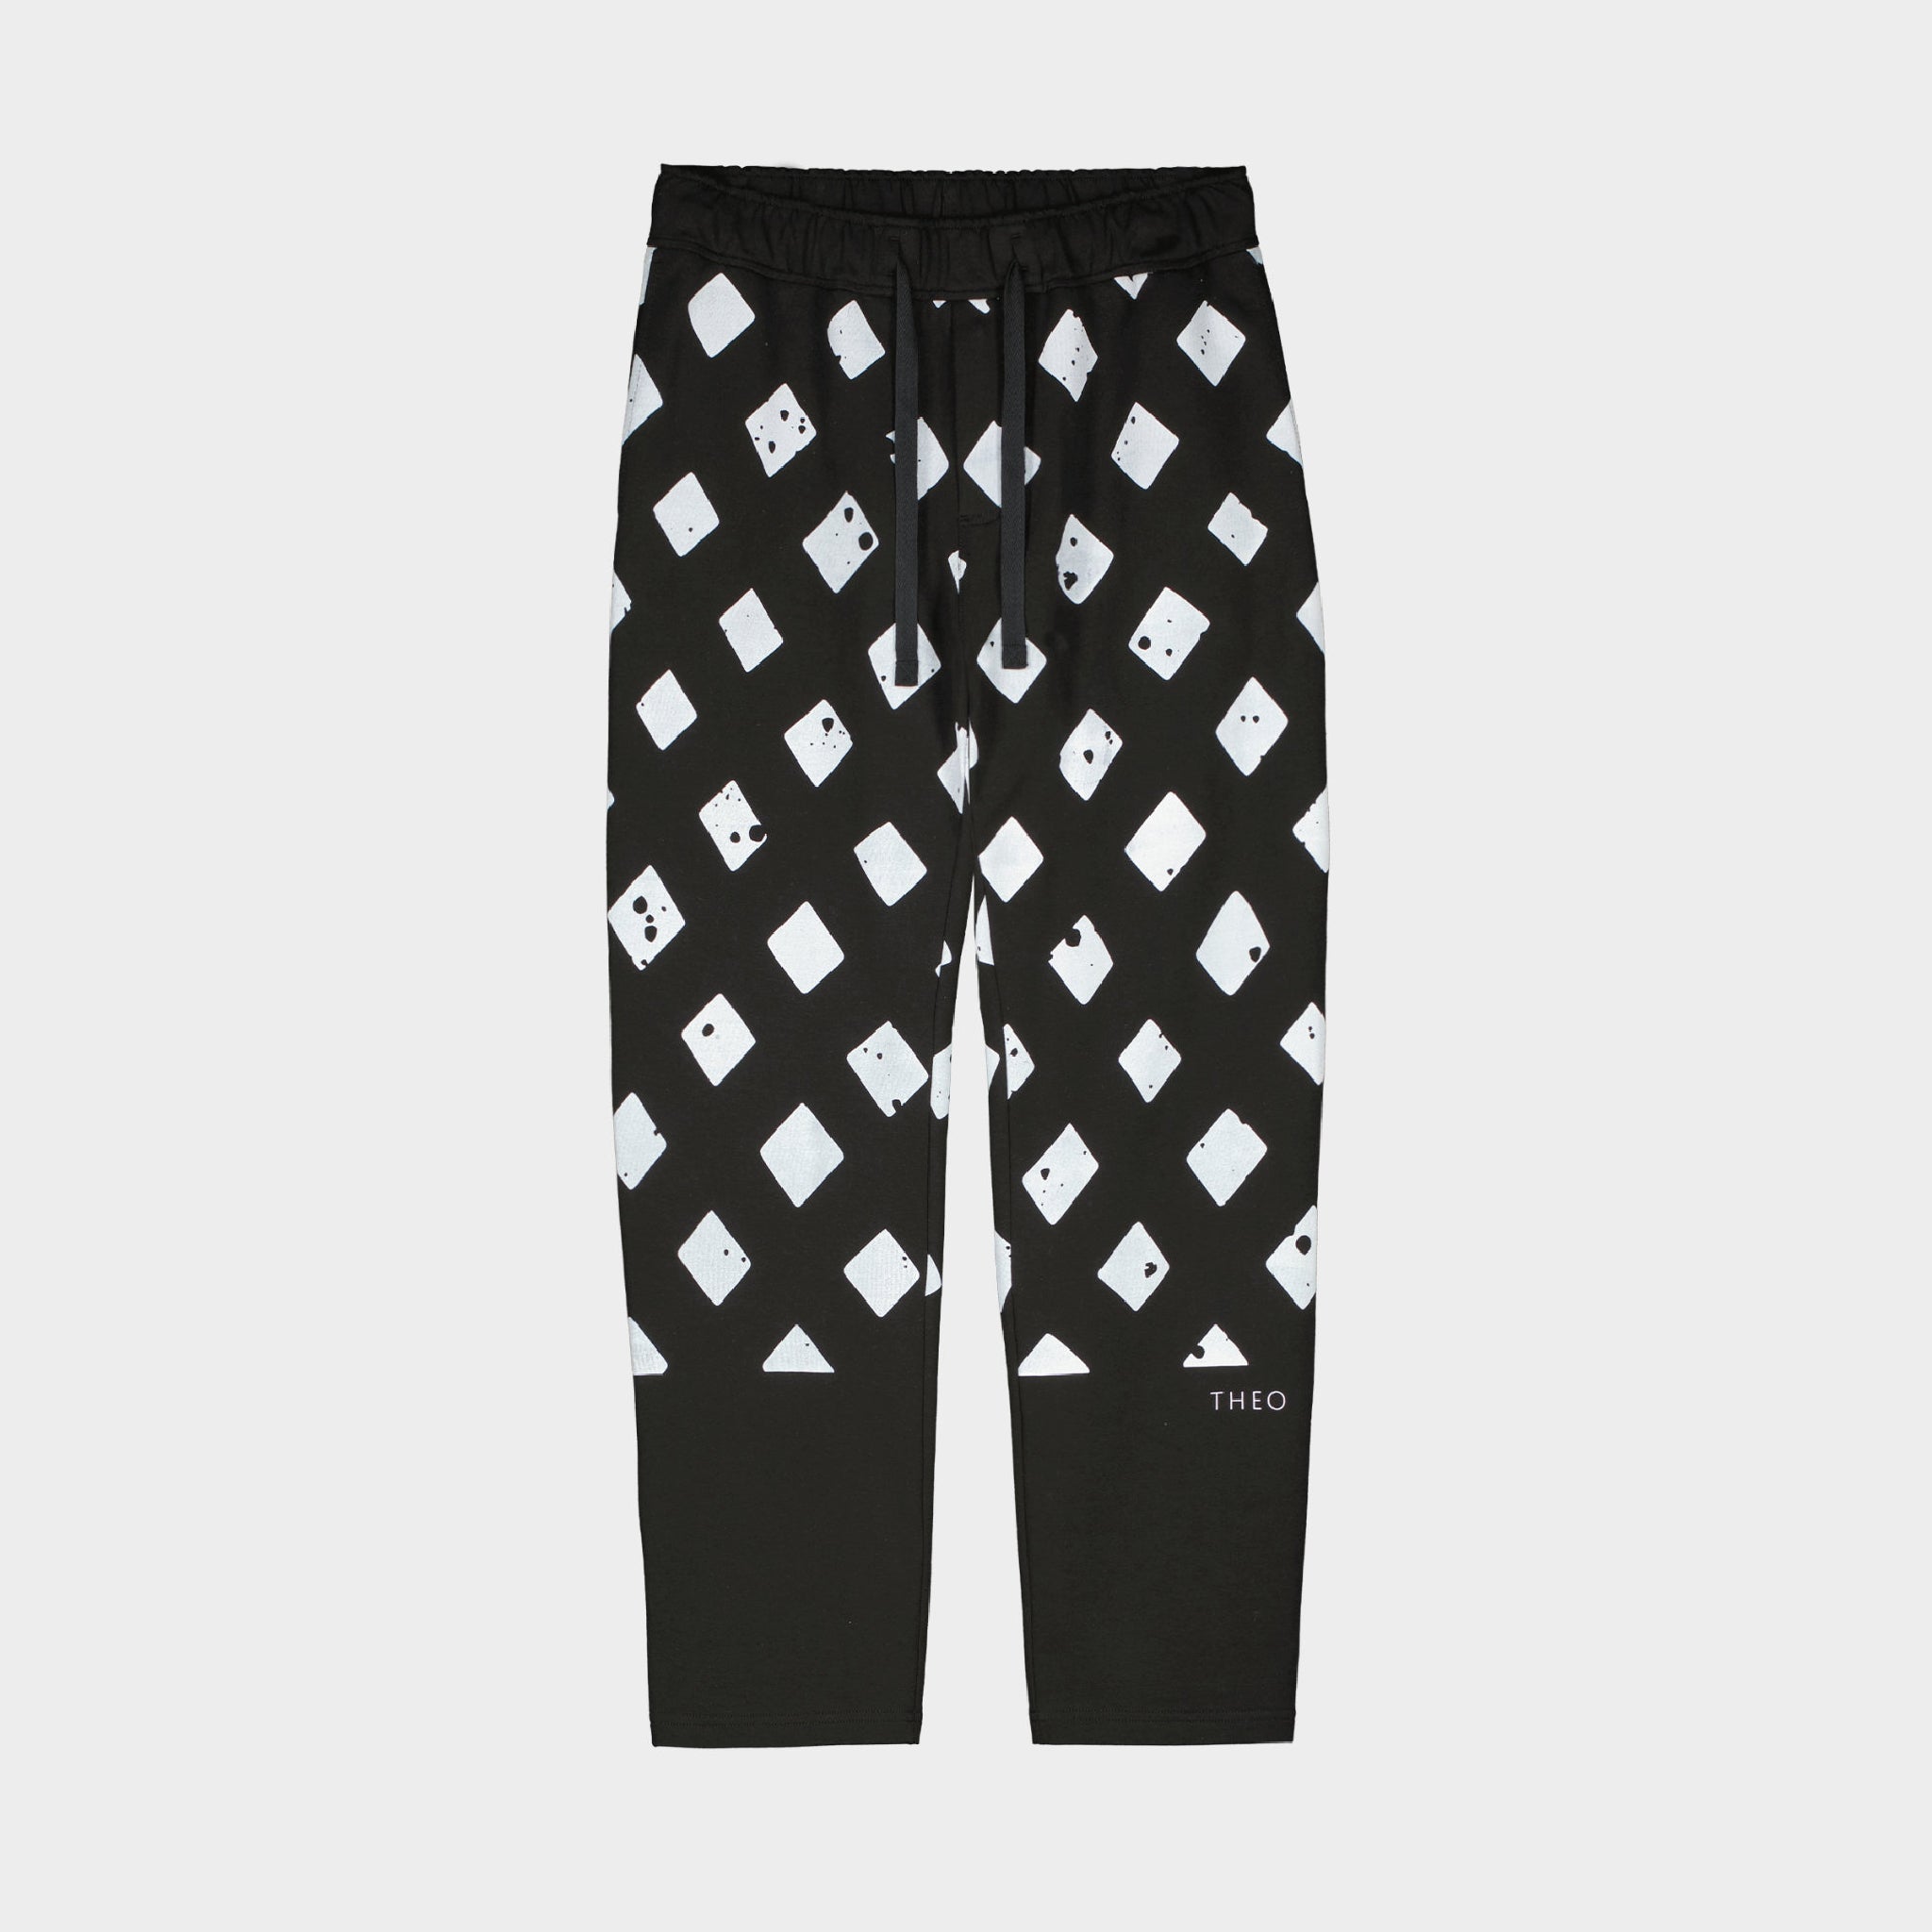 SWEATPANTS WITH A CONTRASTING TEXTURED RHOMBUS PRINT